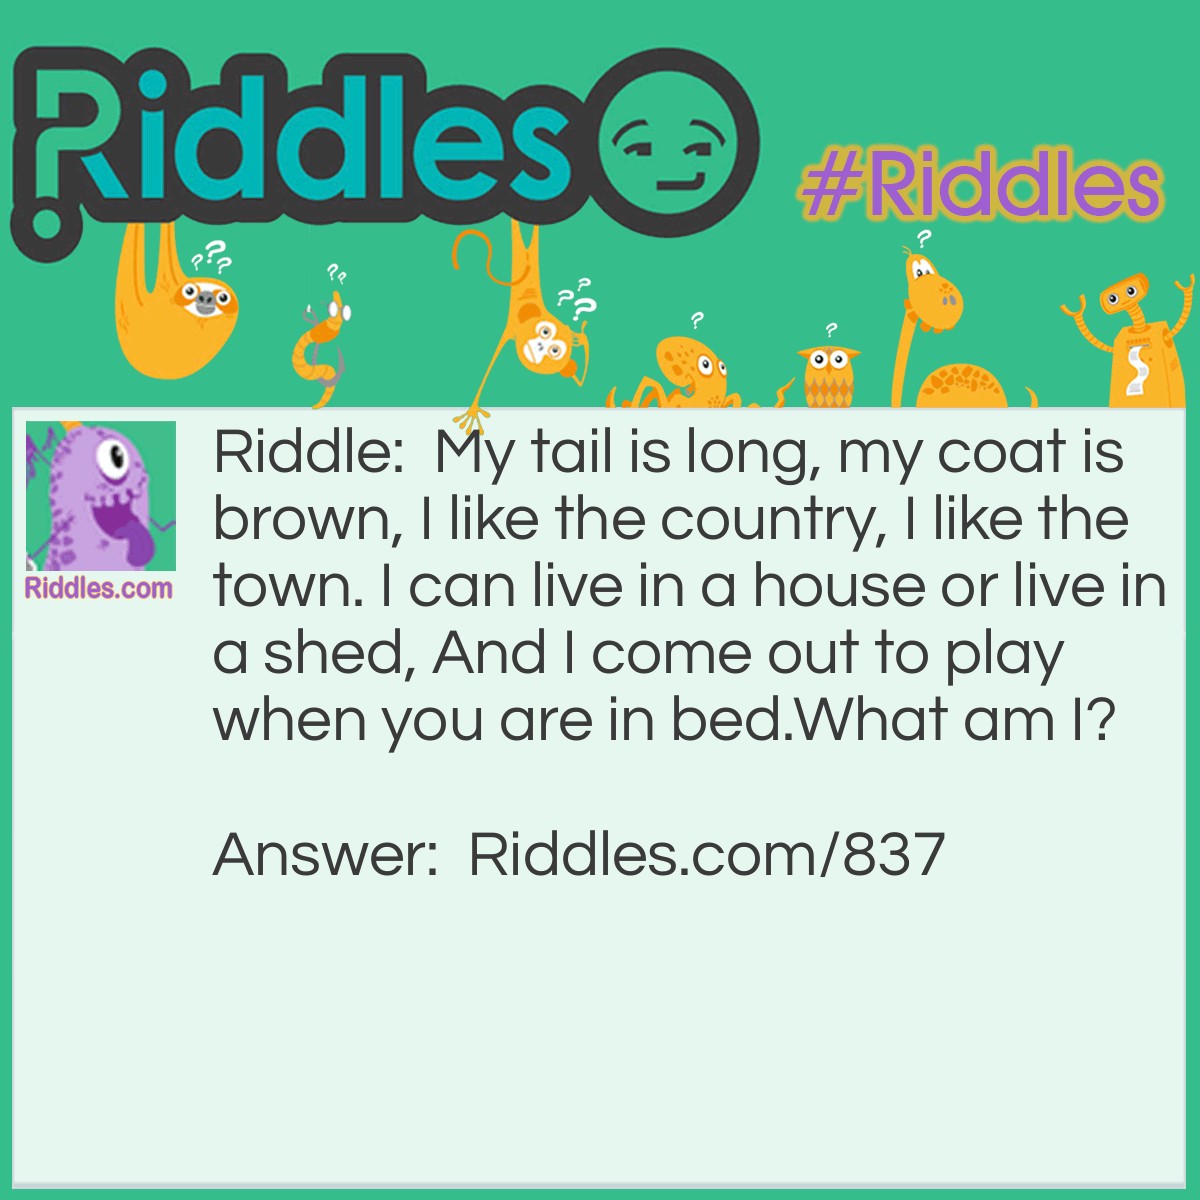 Riddle: My tail is long, my coat is brown, I like the country, I like the town. I can live in a house or live in a shed, And I come out to play when you are in bed. 
What am I? Answer: A Mouse.